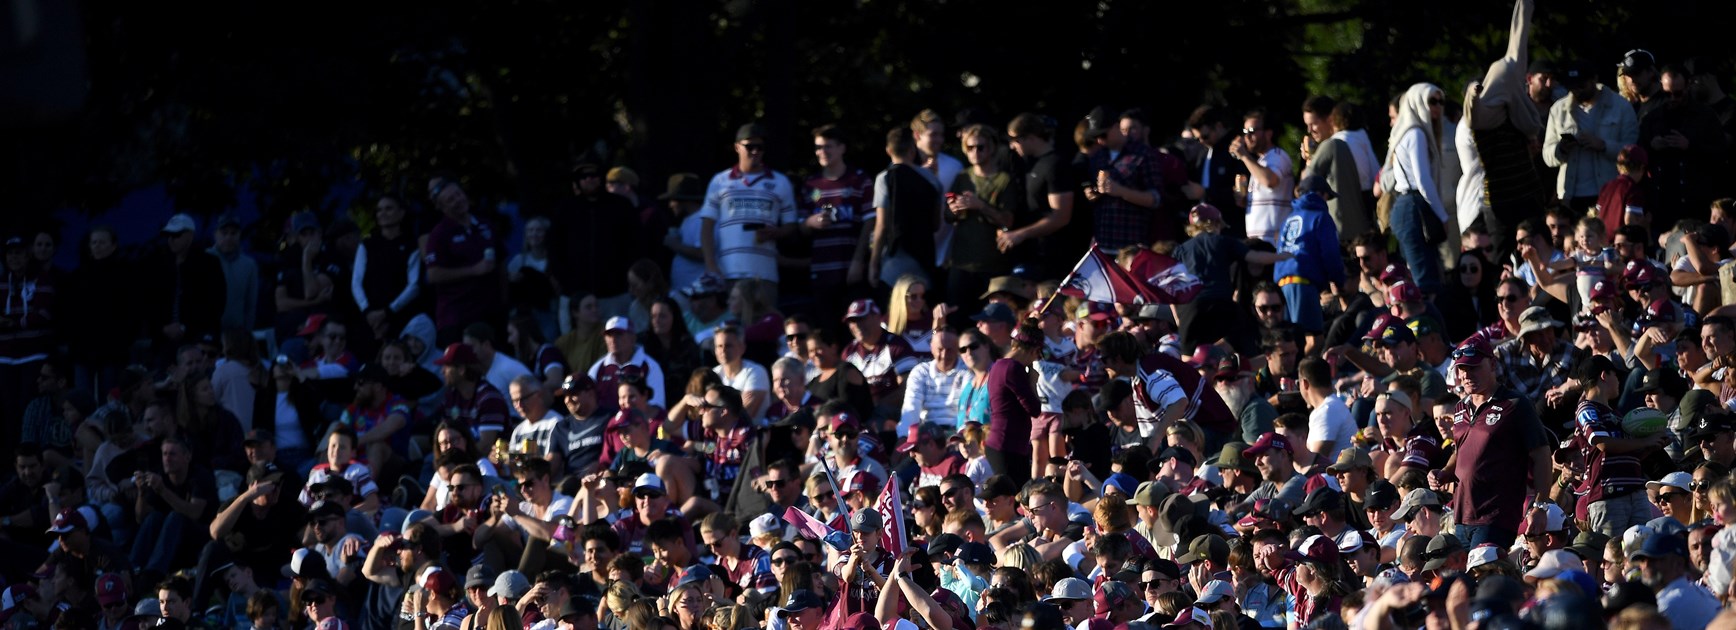 Sea Eagles Finals Match Confirmed for Lottoland